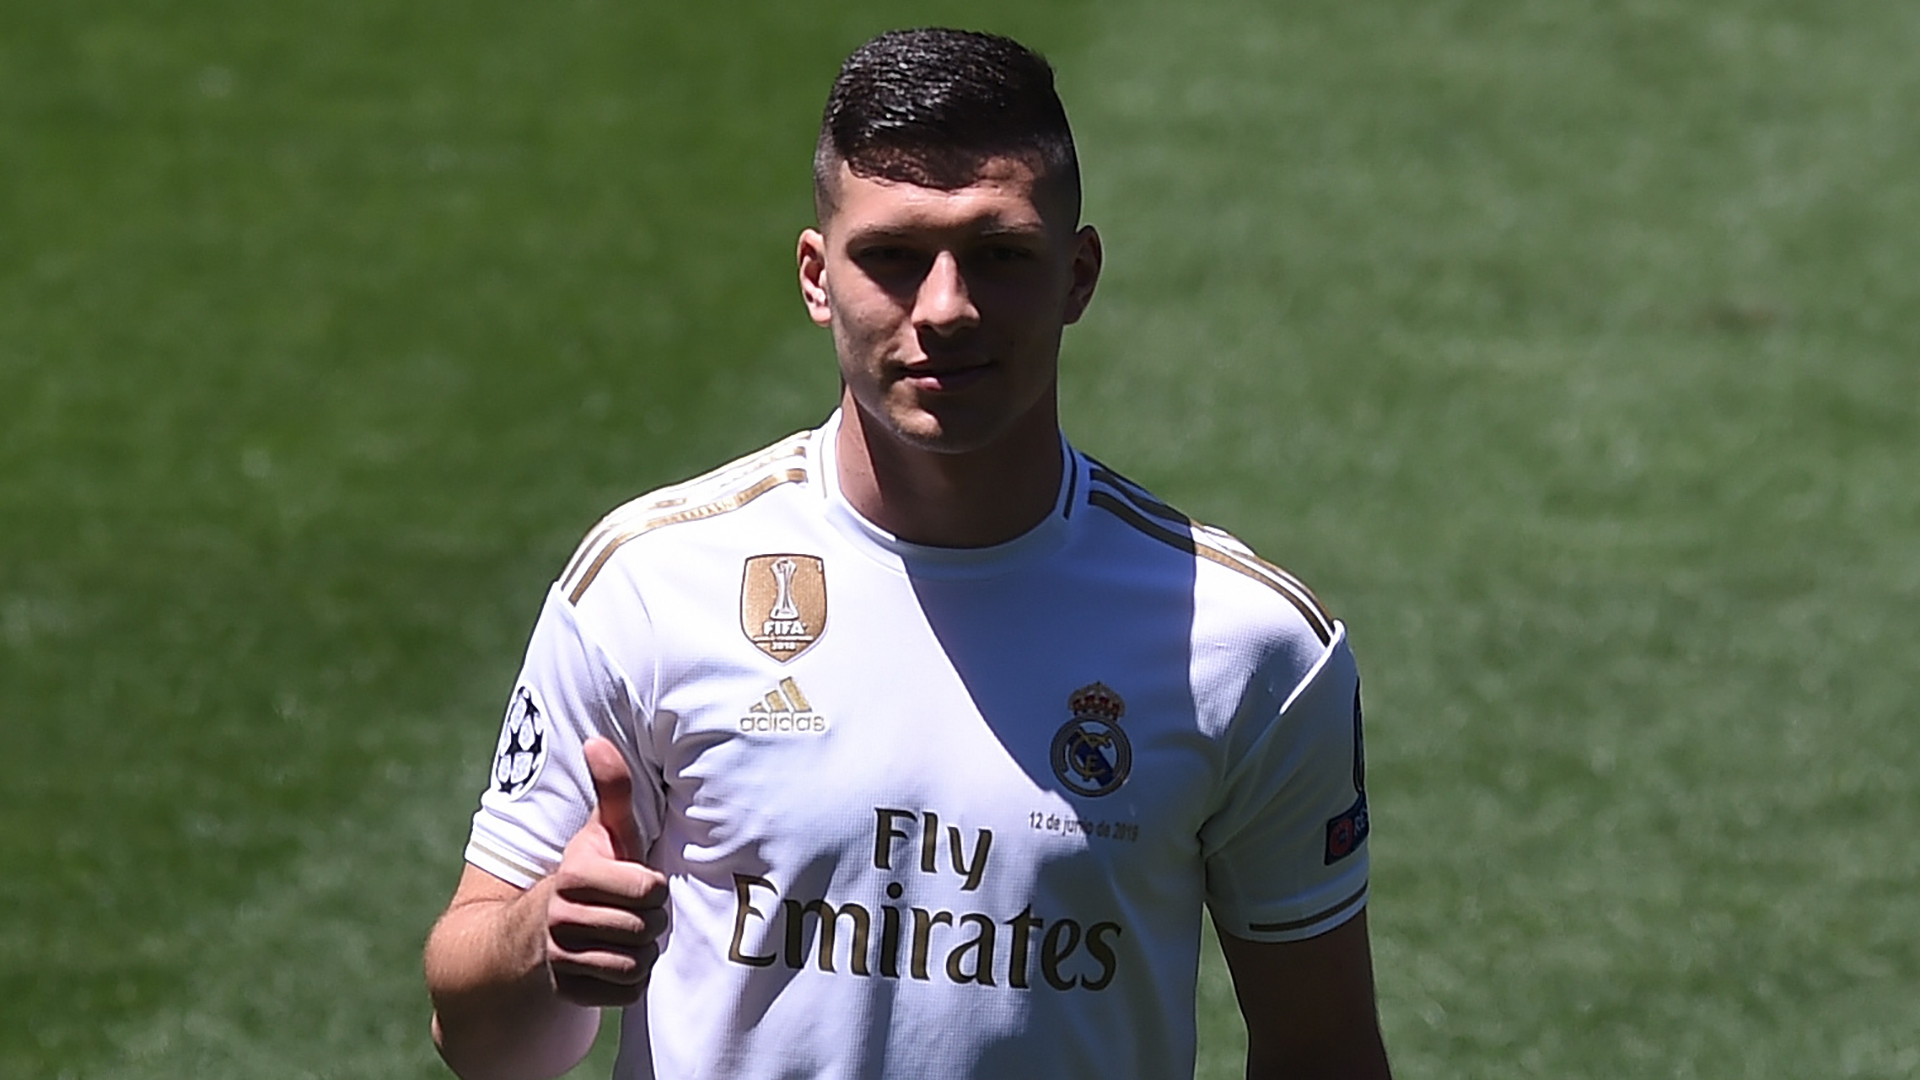 luka jovic jersey number in real madrid